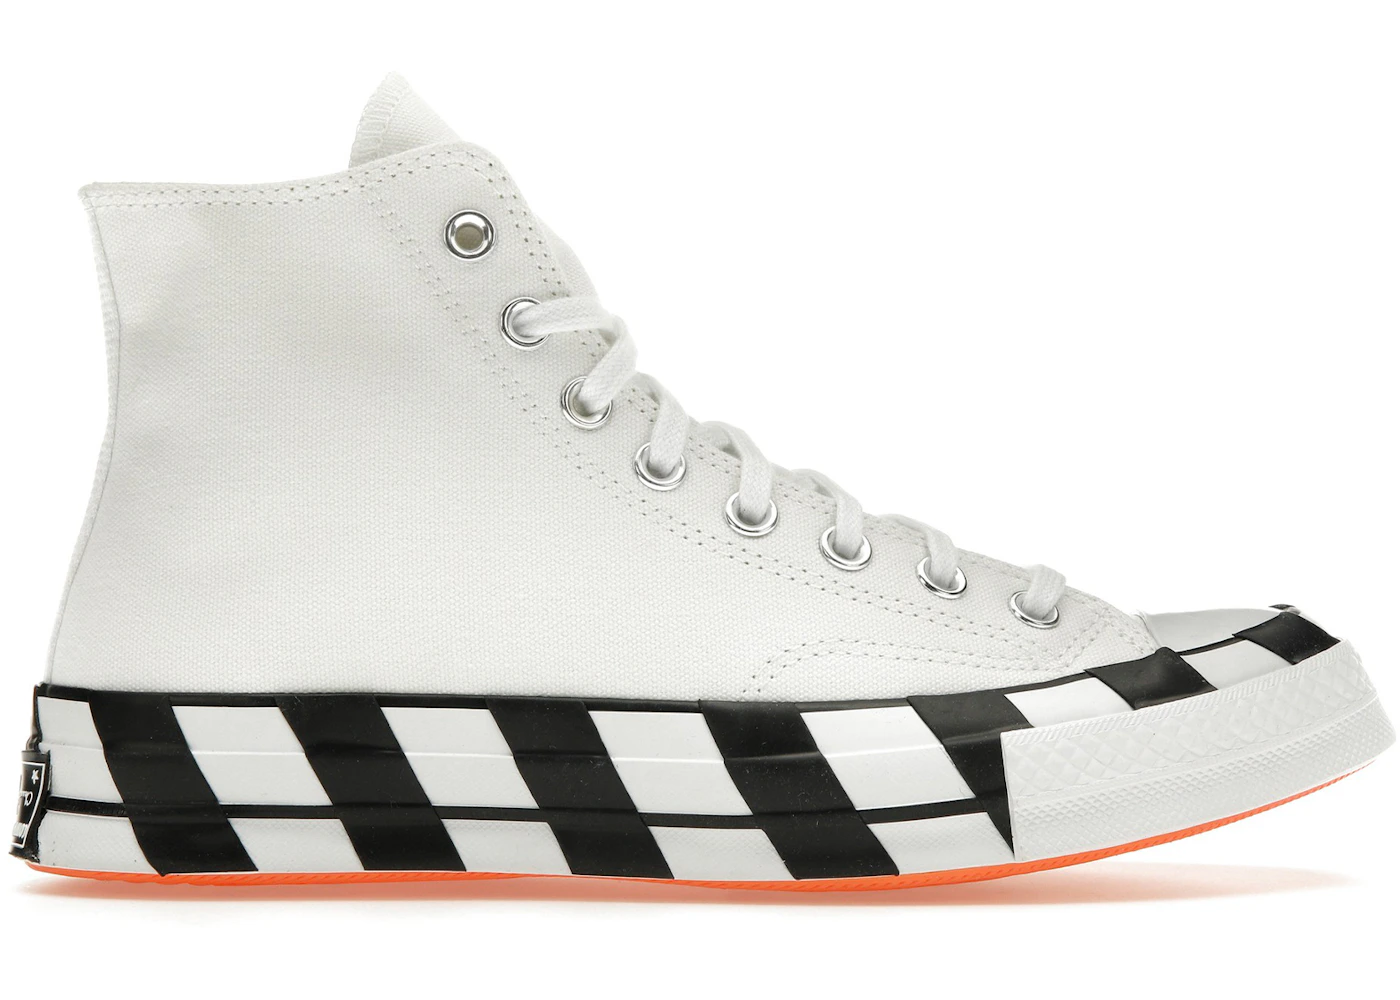 Hare Score See through Converse Chuck Taylor All-Star 70 Hi Off-White - 163862C - US